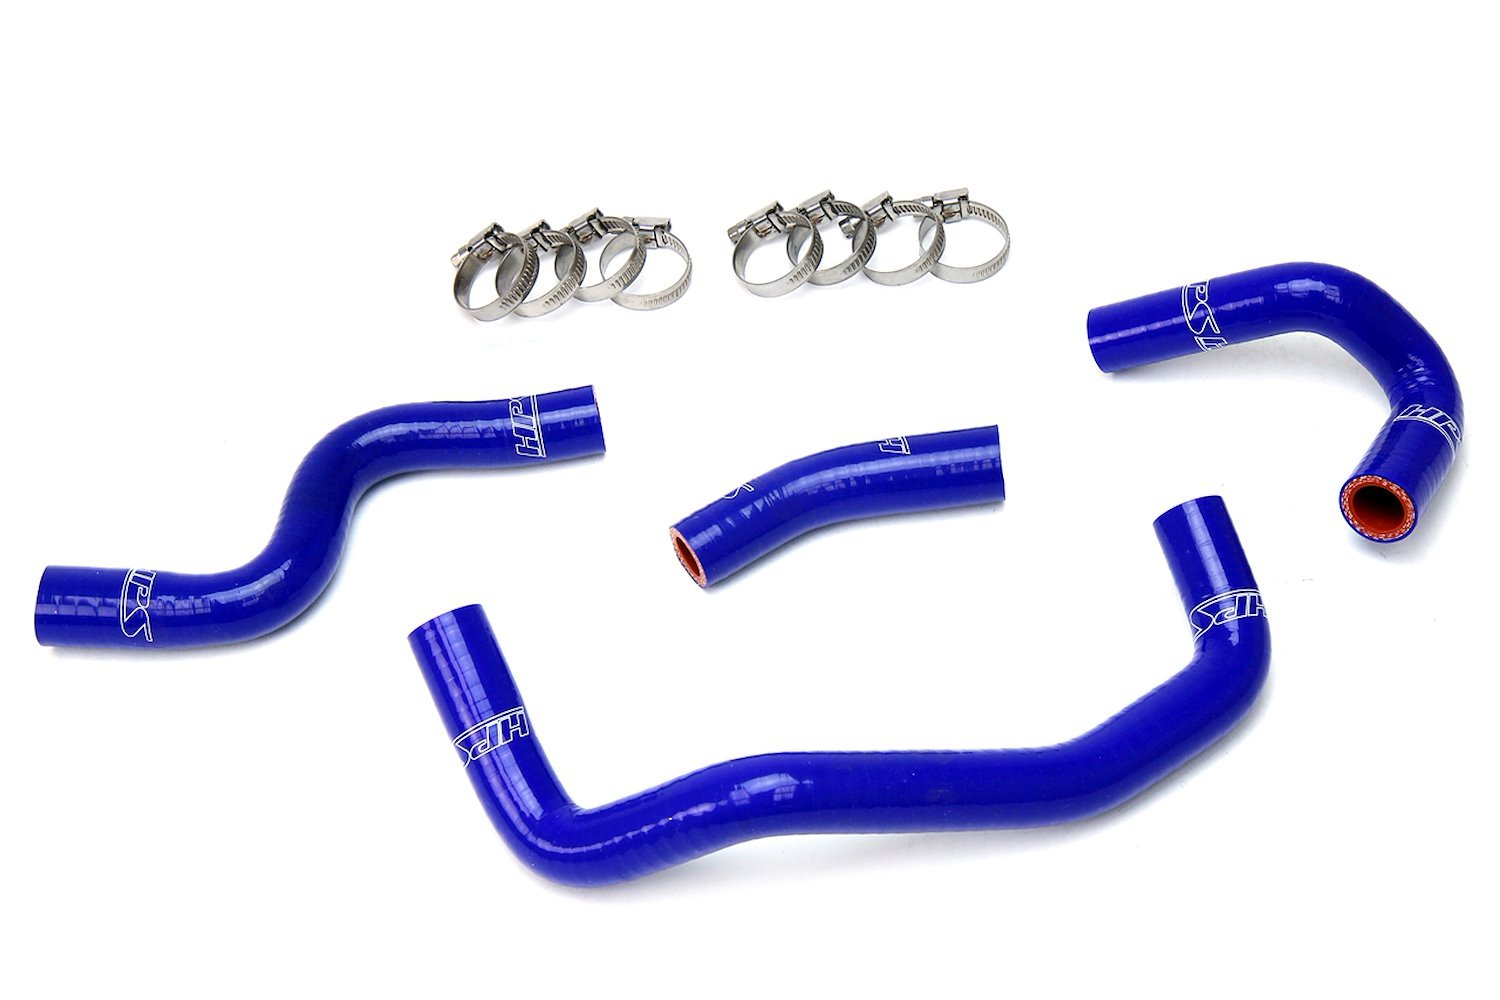 57-1508-BLUE Heater Hose Kit, High-Temp 3-Ply Reinforced Silicone, Replace OEM Rubber Heater Coolant Hoses